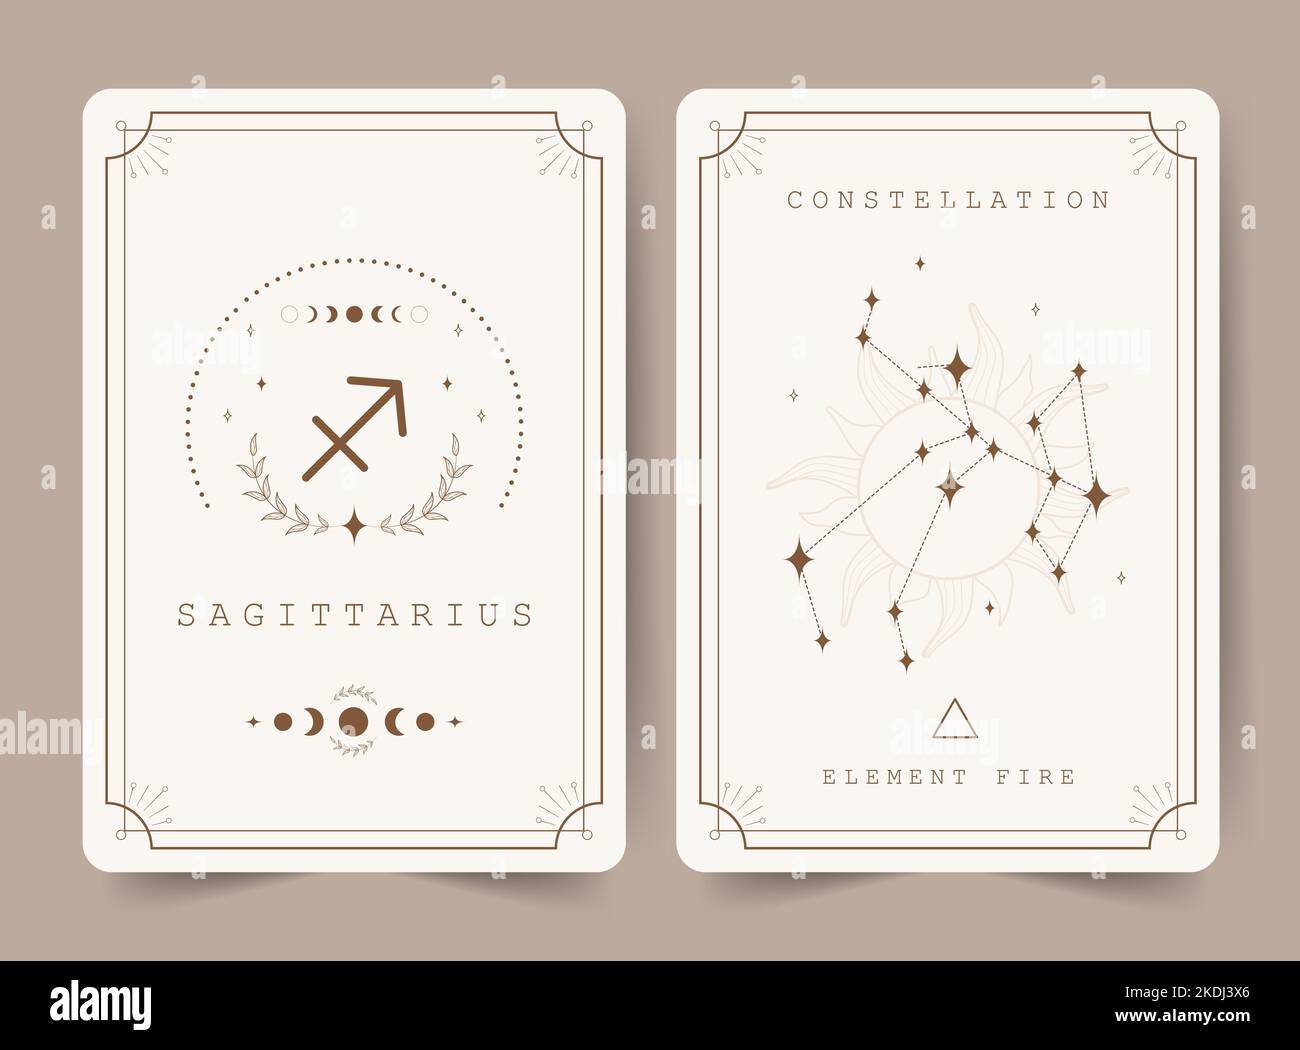 Sagittarius. Witchcraft cards with astrology zodiac sign and constellation. Perfect for tarot readers and astrologers. Occult magic background Stock Vector